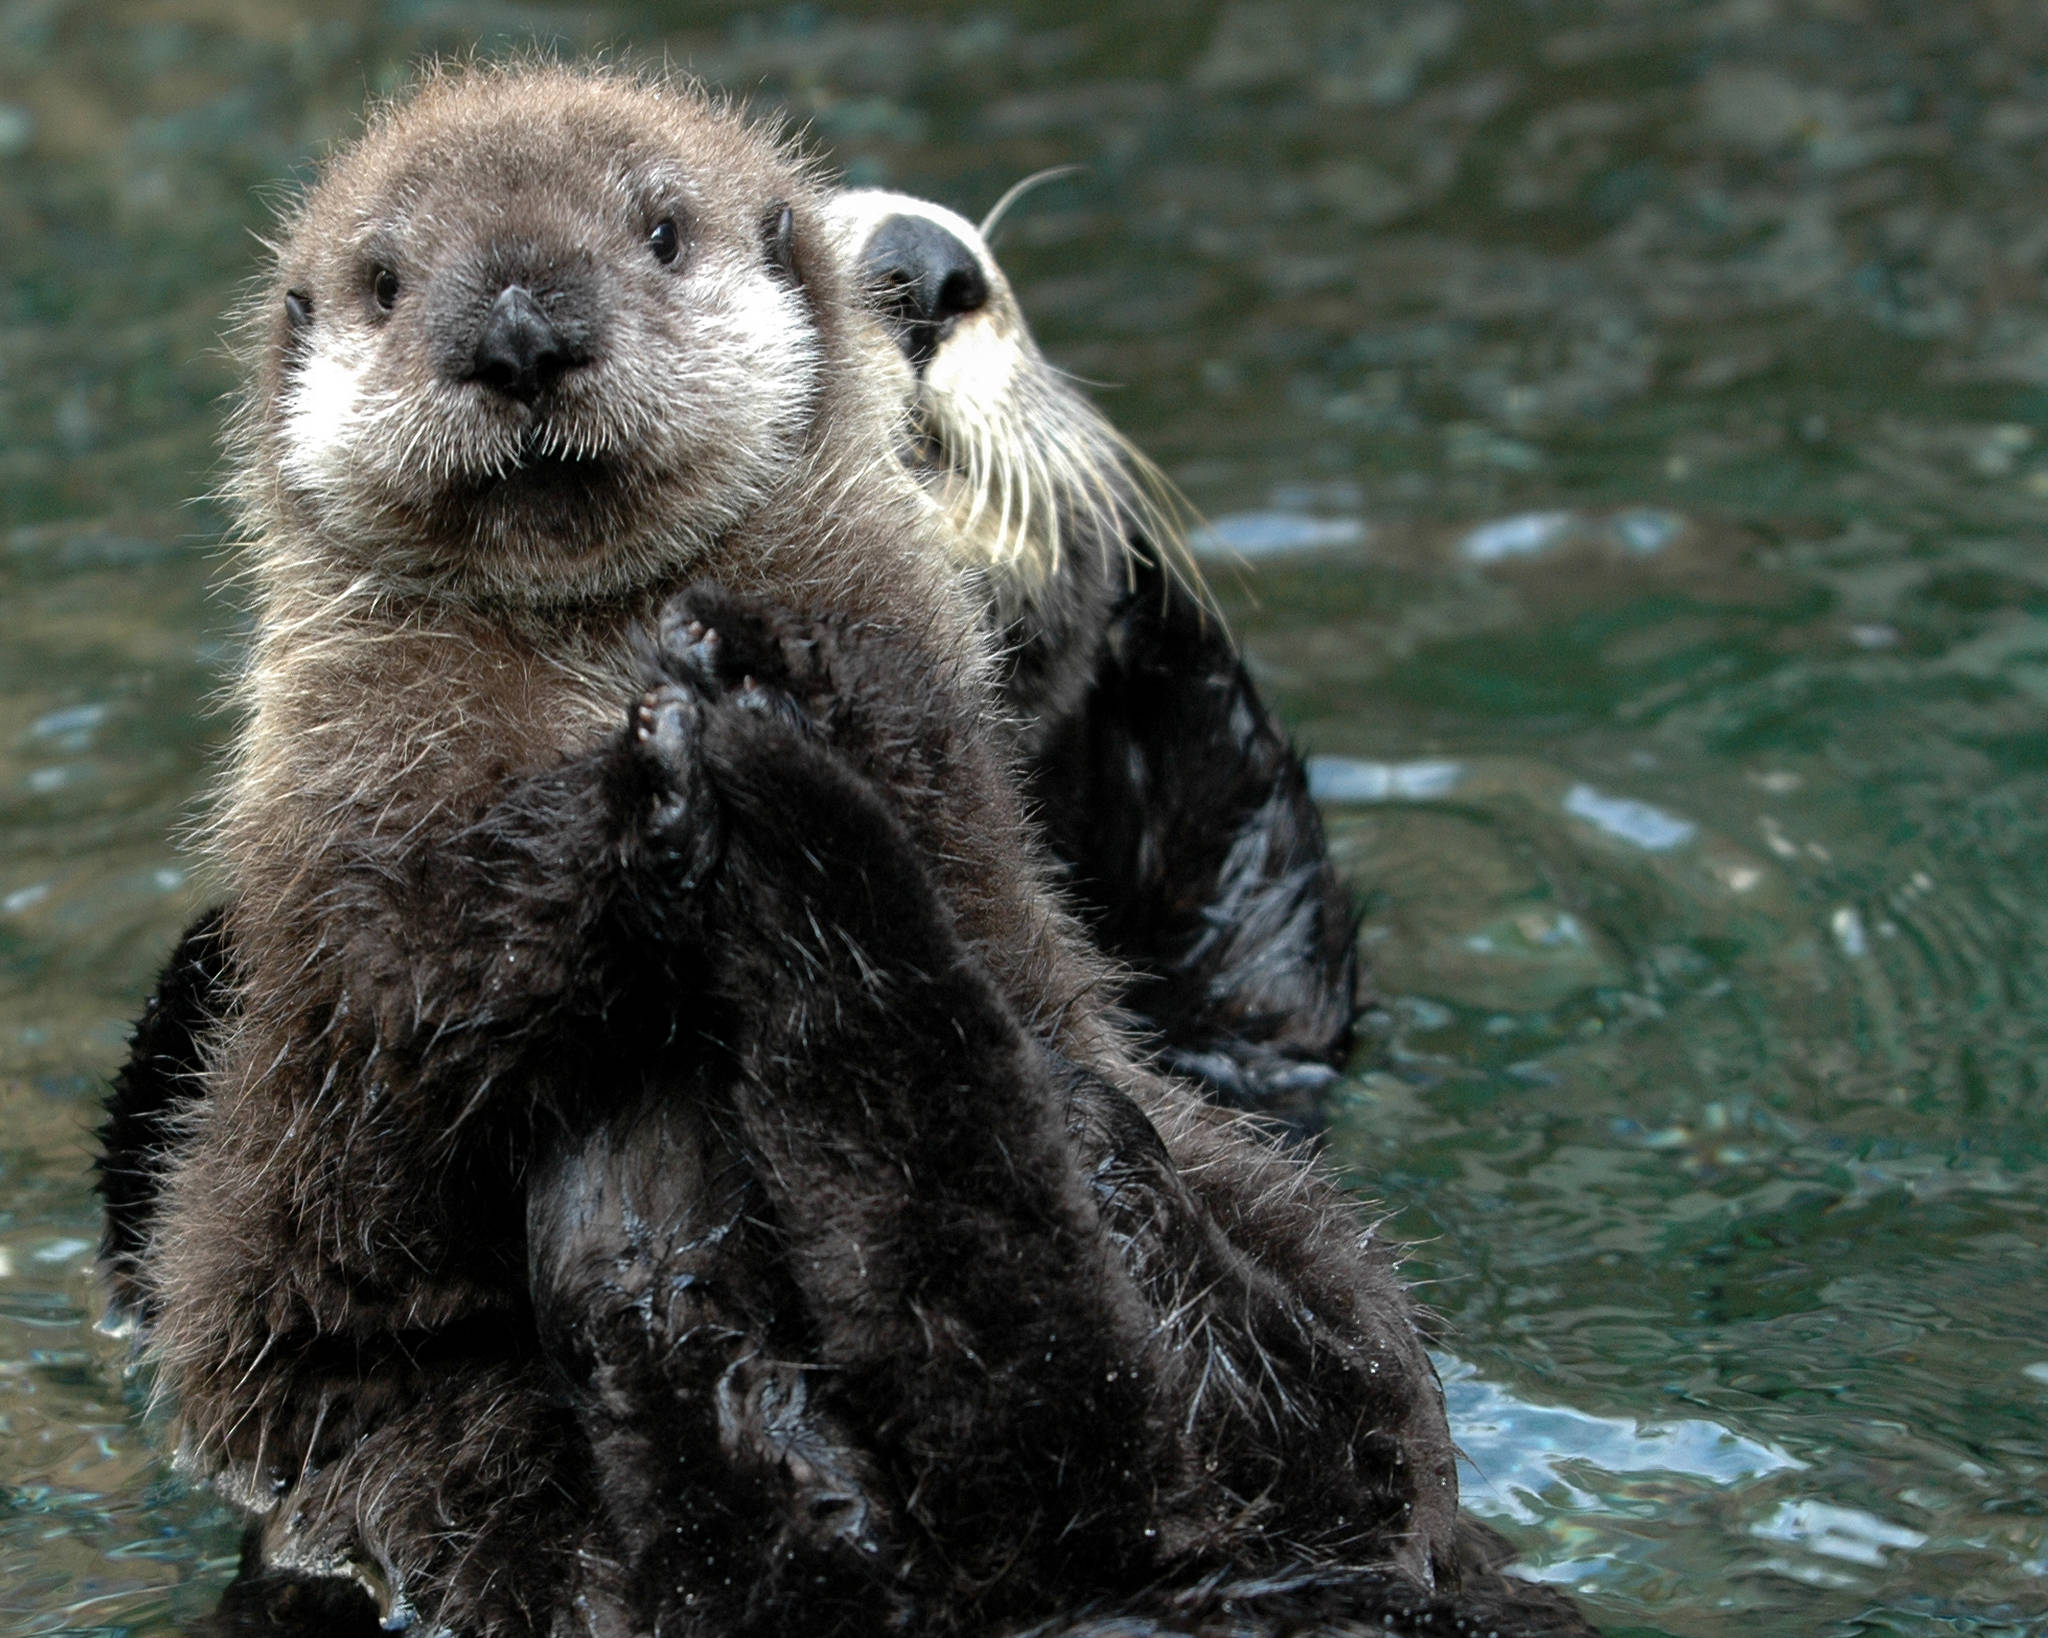 Can sea otters save the world